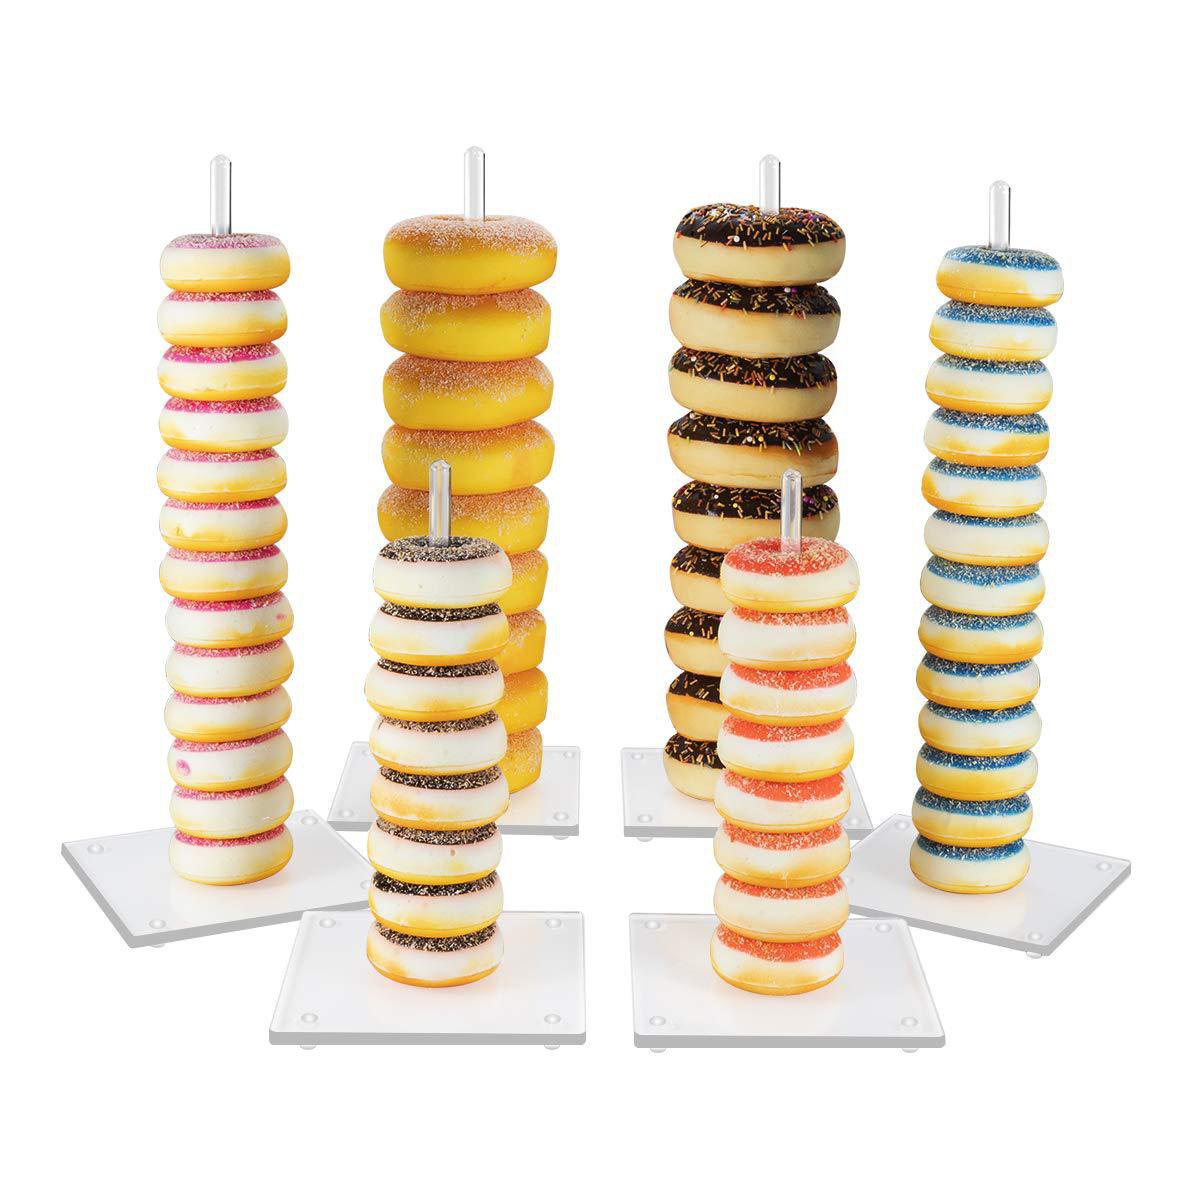 6pcs-Donut-Wall-Storage-Stand-Acrylic-Candy-Sweet-Party-Doughnut-Holder-Display-Box-1590468-2